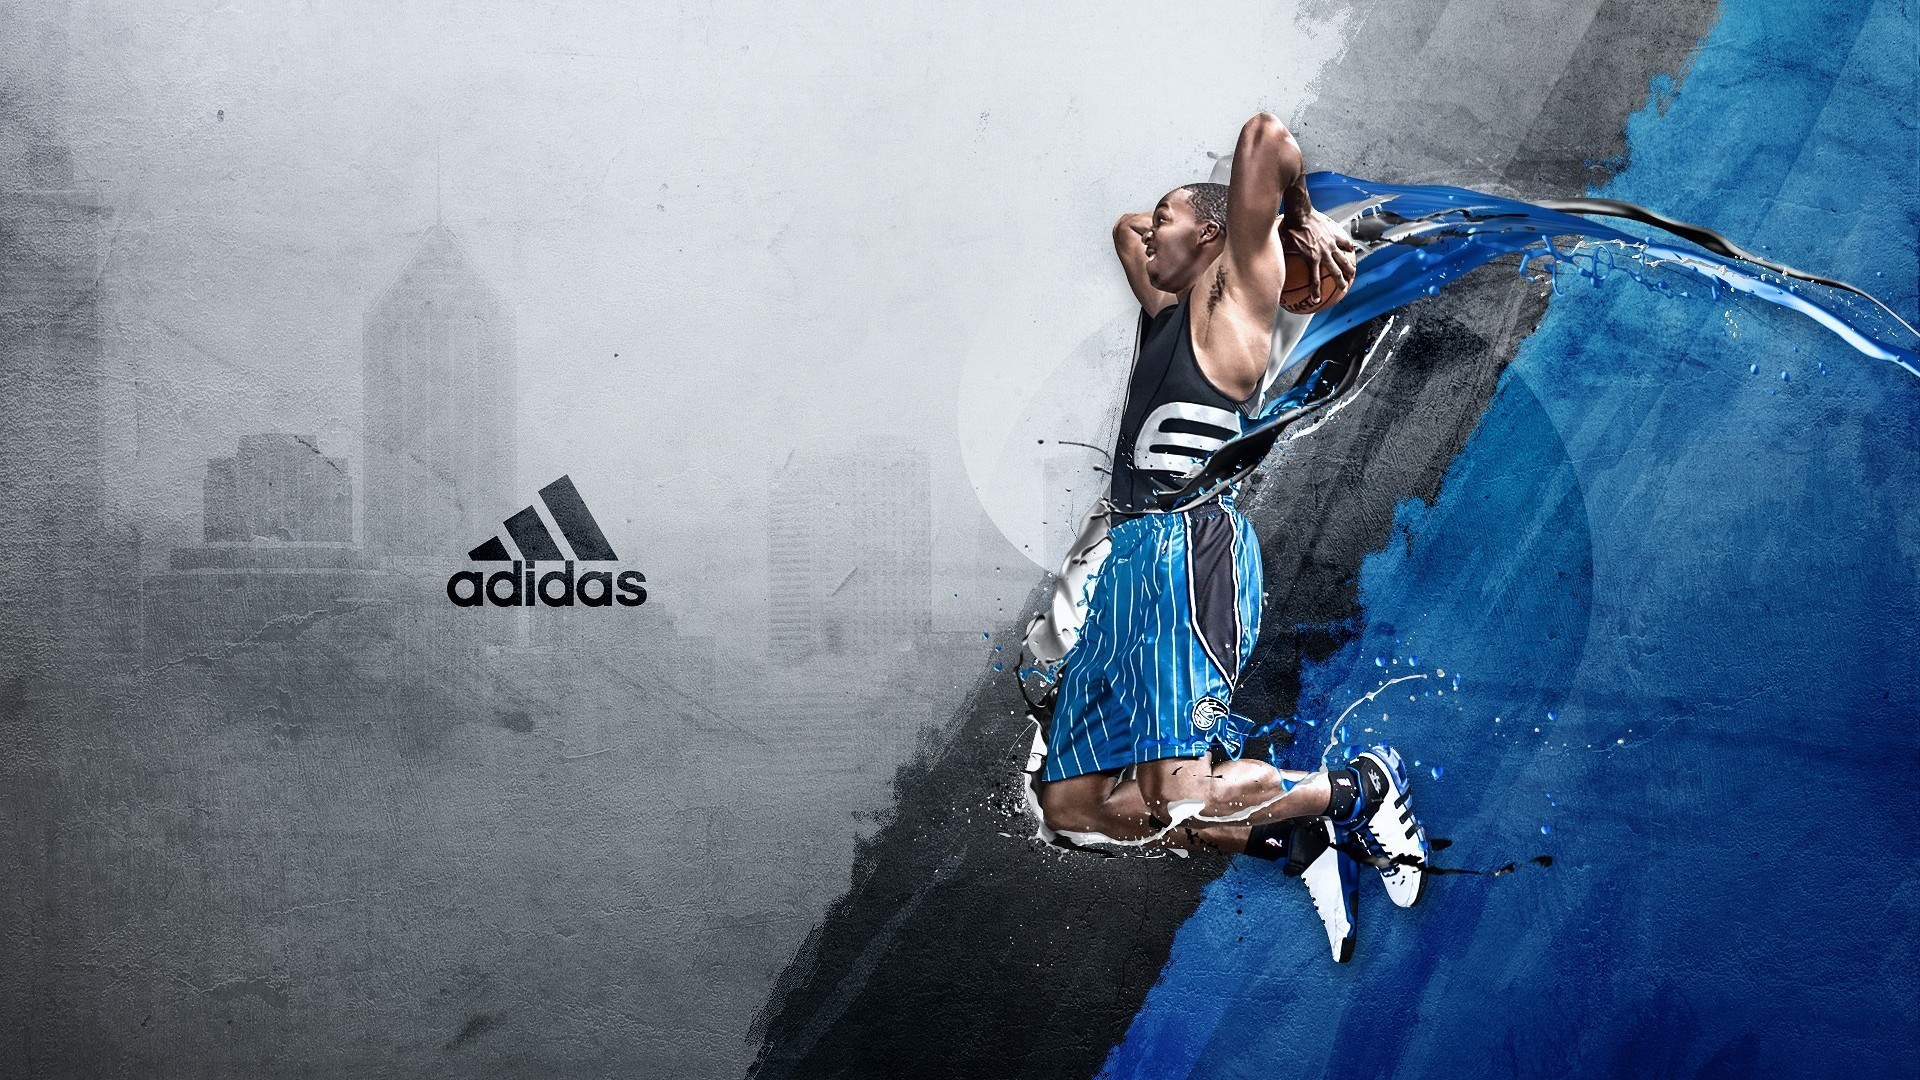 1920x1080 Top 10 Sports Wallpapers 2012 Risen Sources 